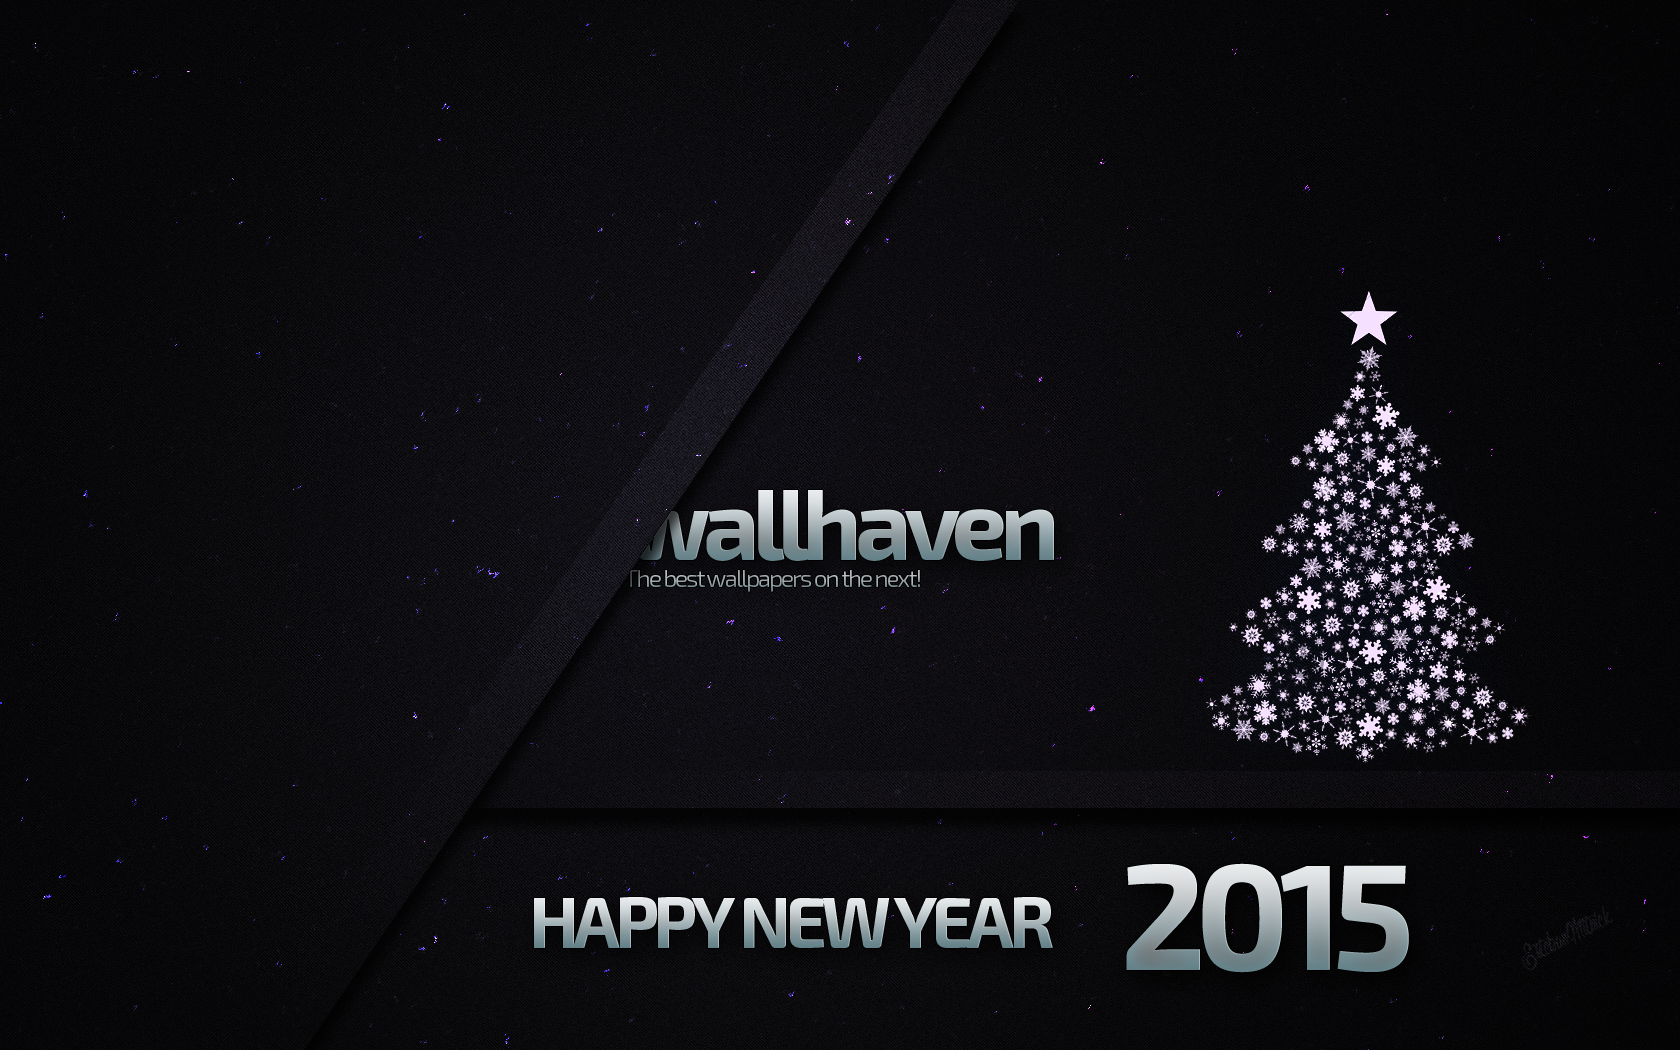 General 1680x1050 wallhaven Christmas New Year Christmas tree 2015 (Year) holiday